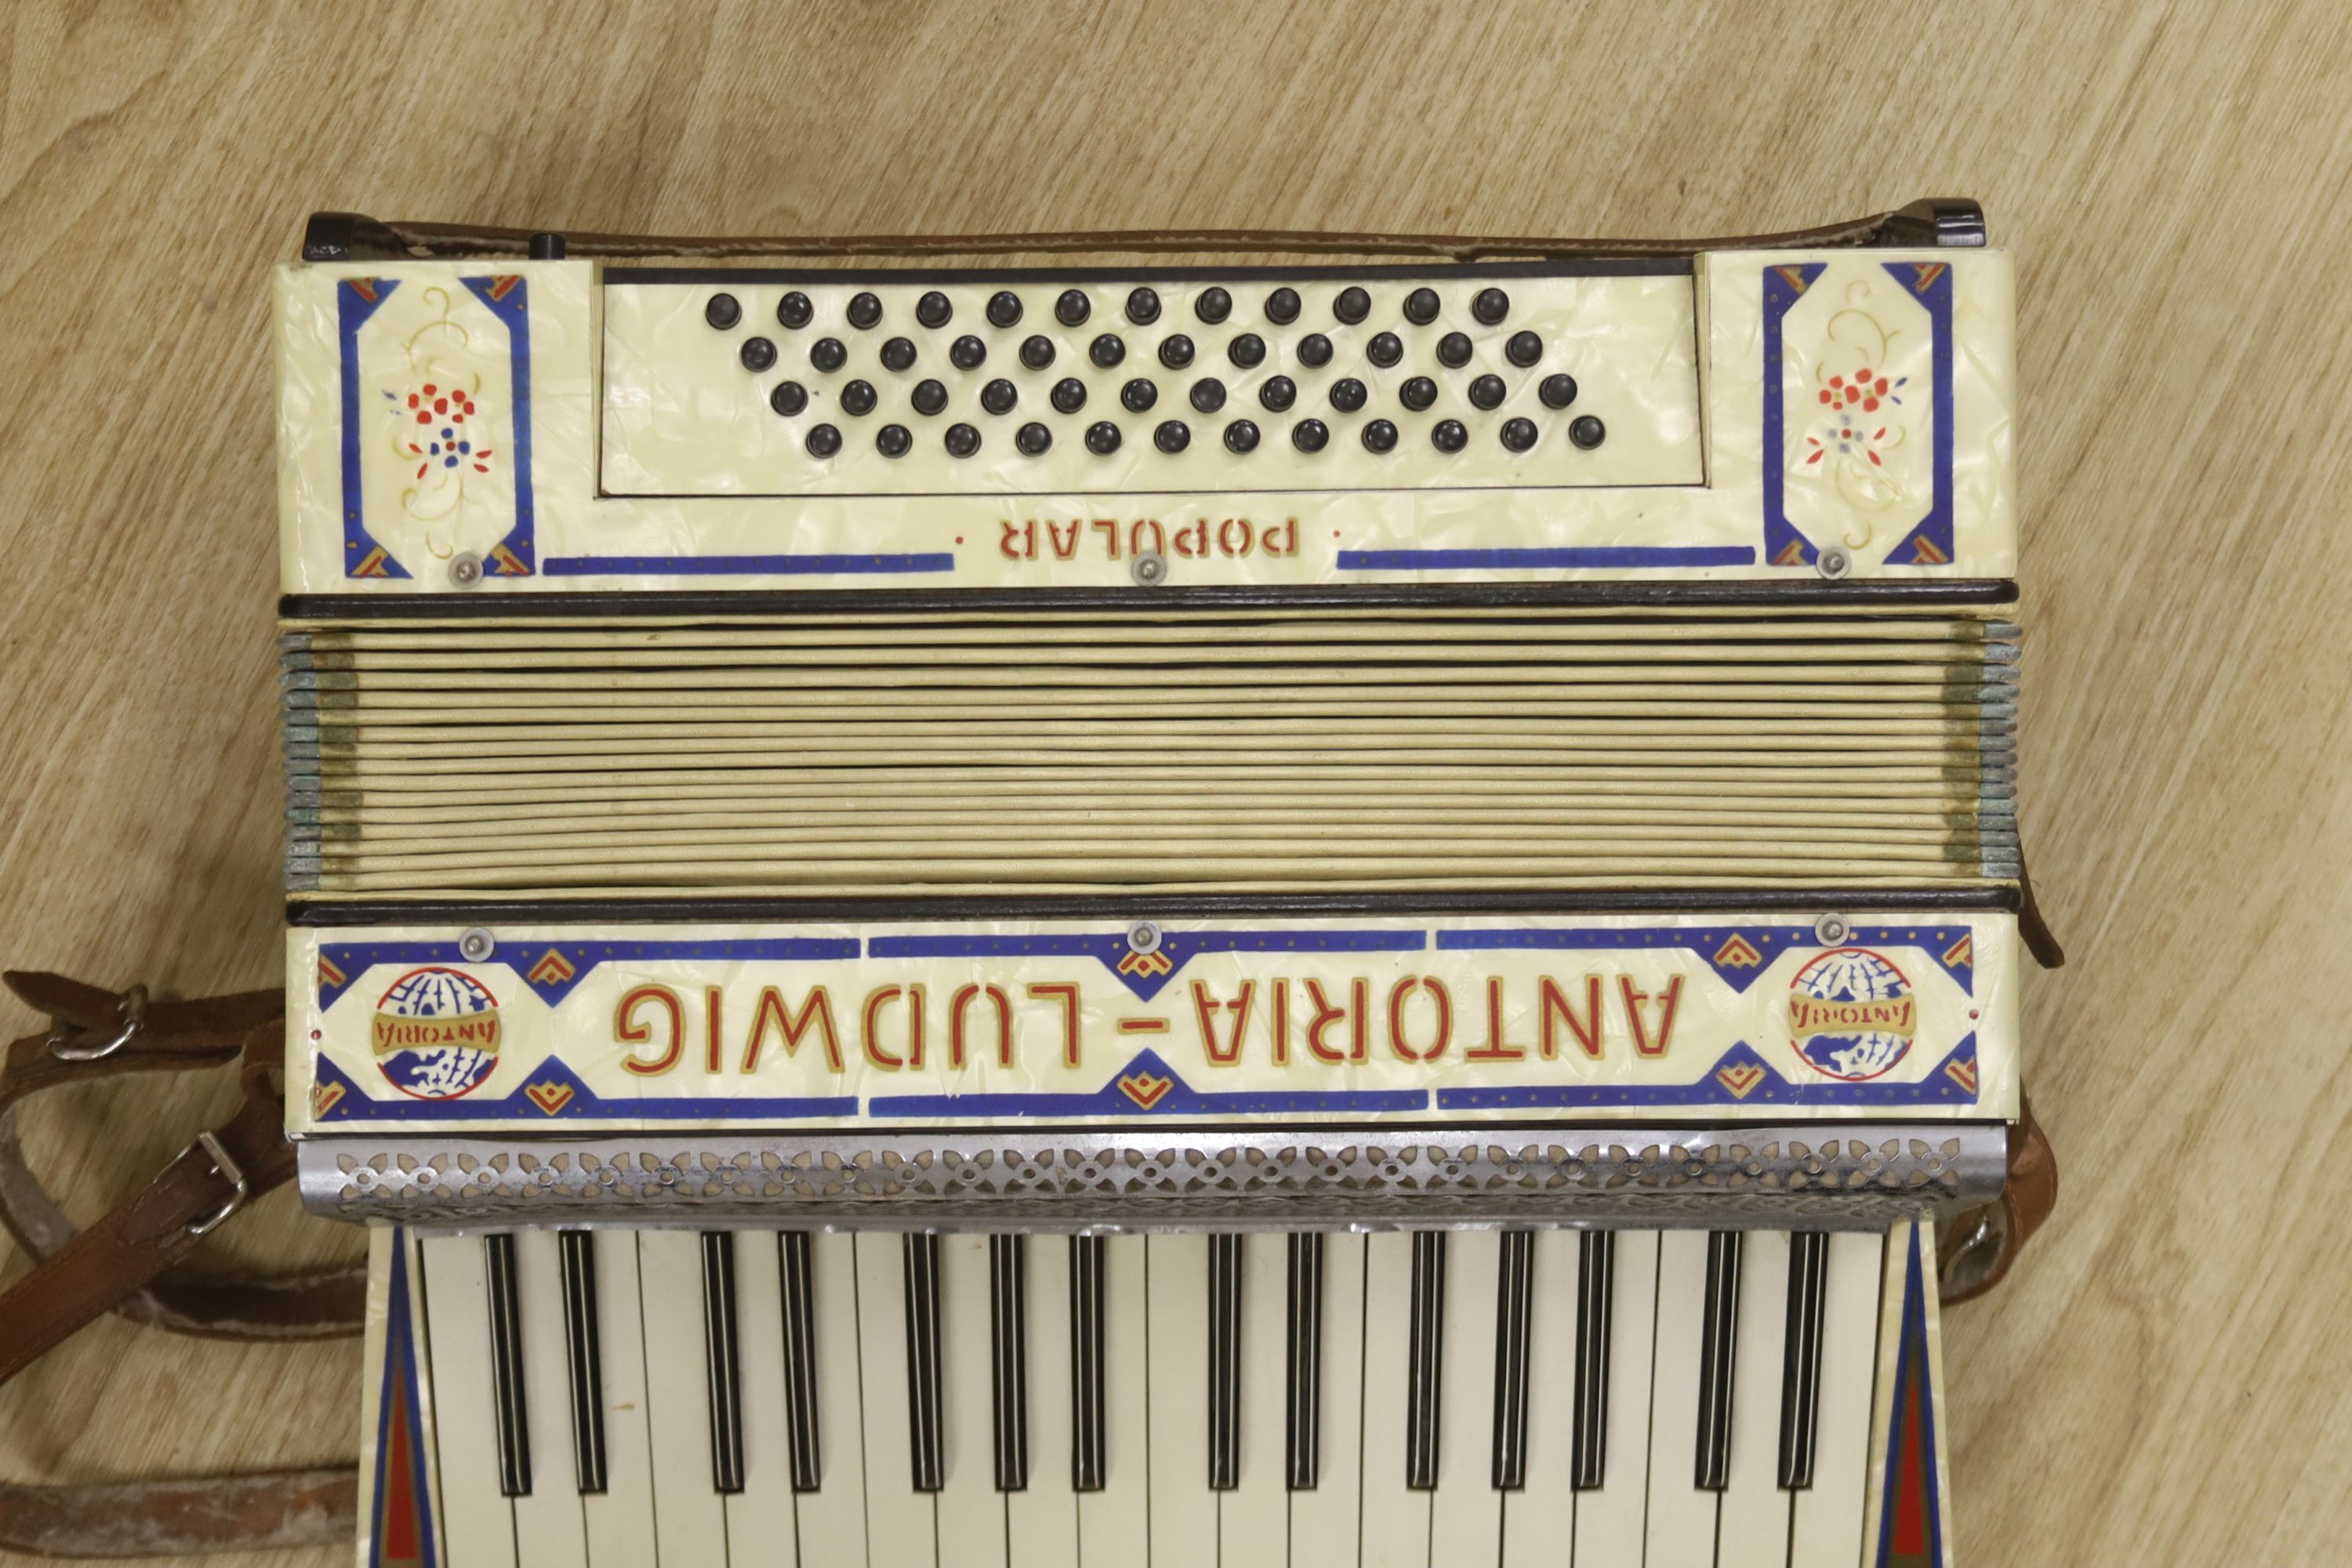 A cased Antoria Ludwig accordian, cased